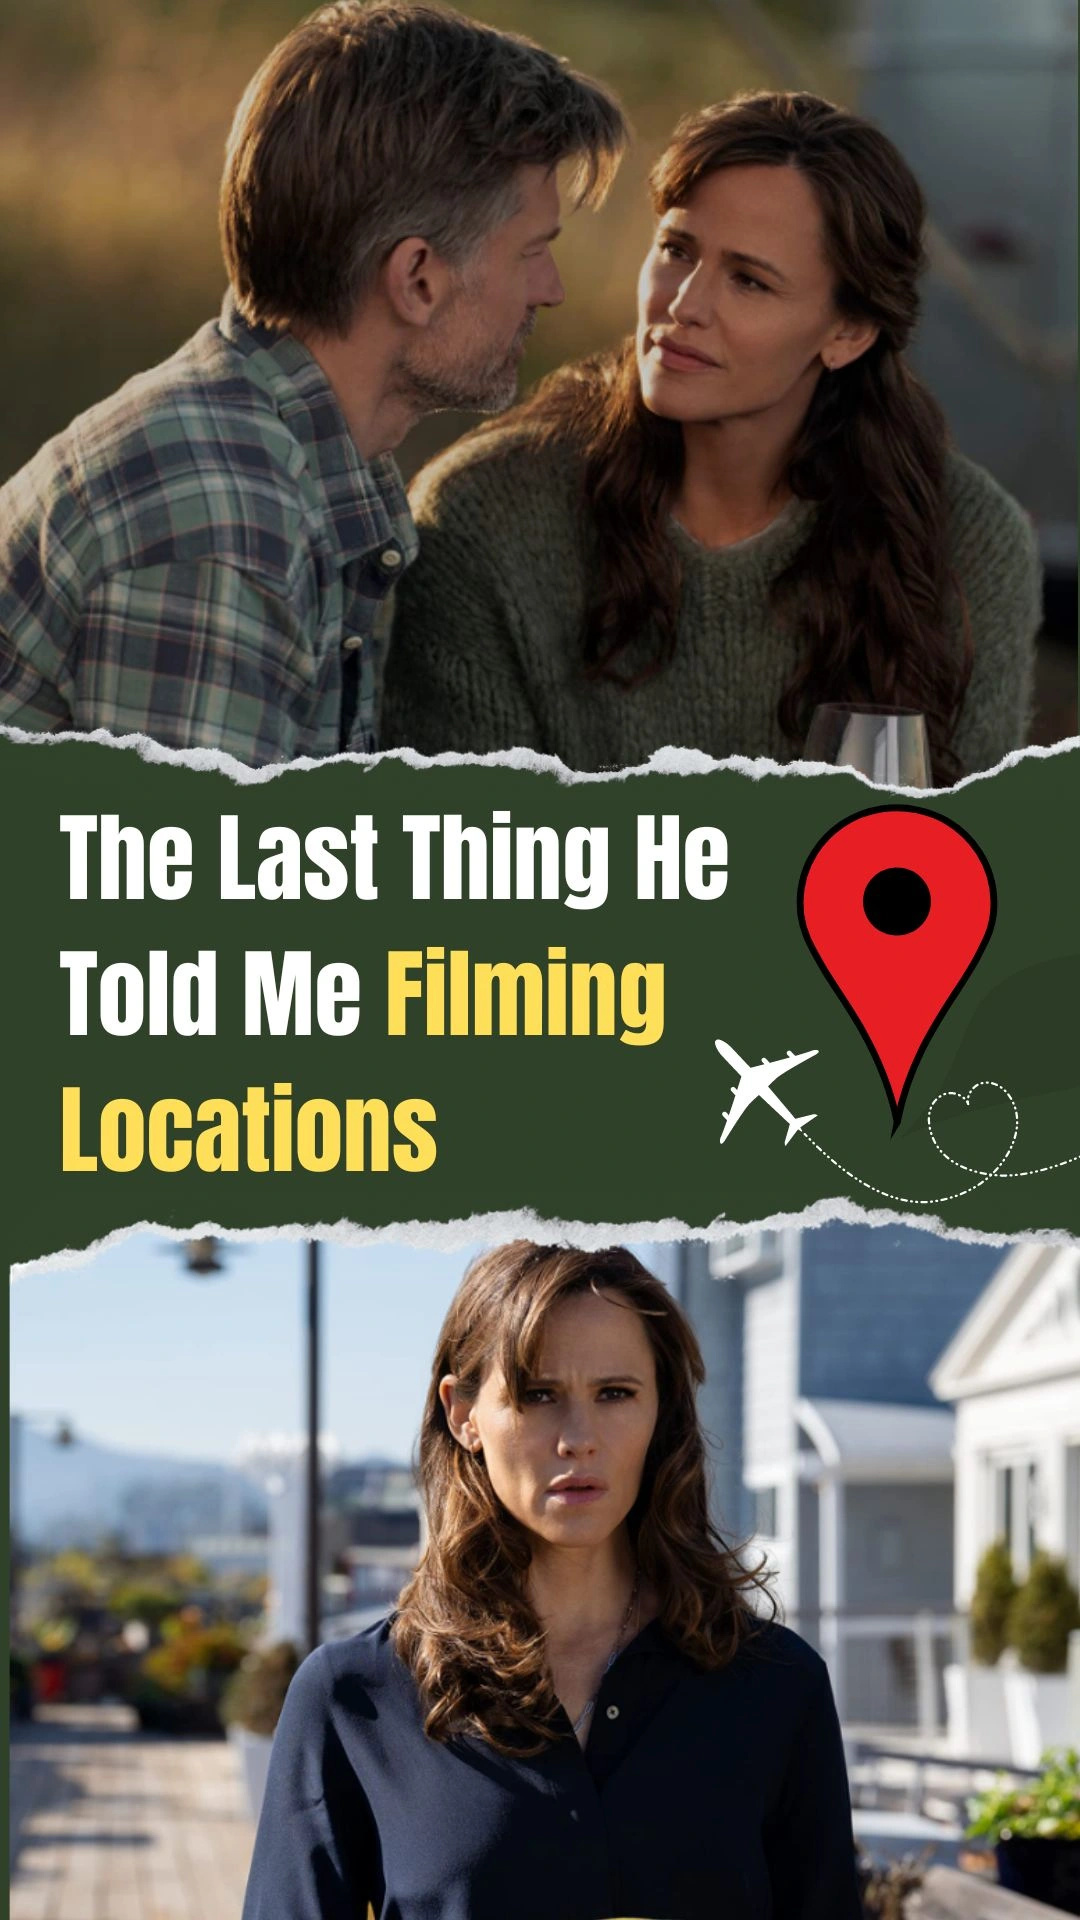 The Last Thing He Told Me Filming Locations